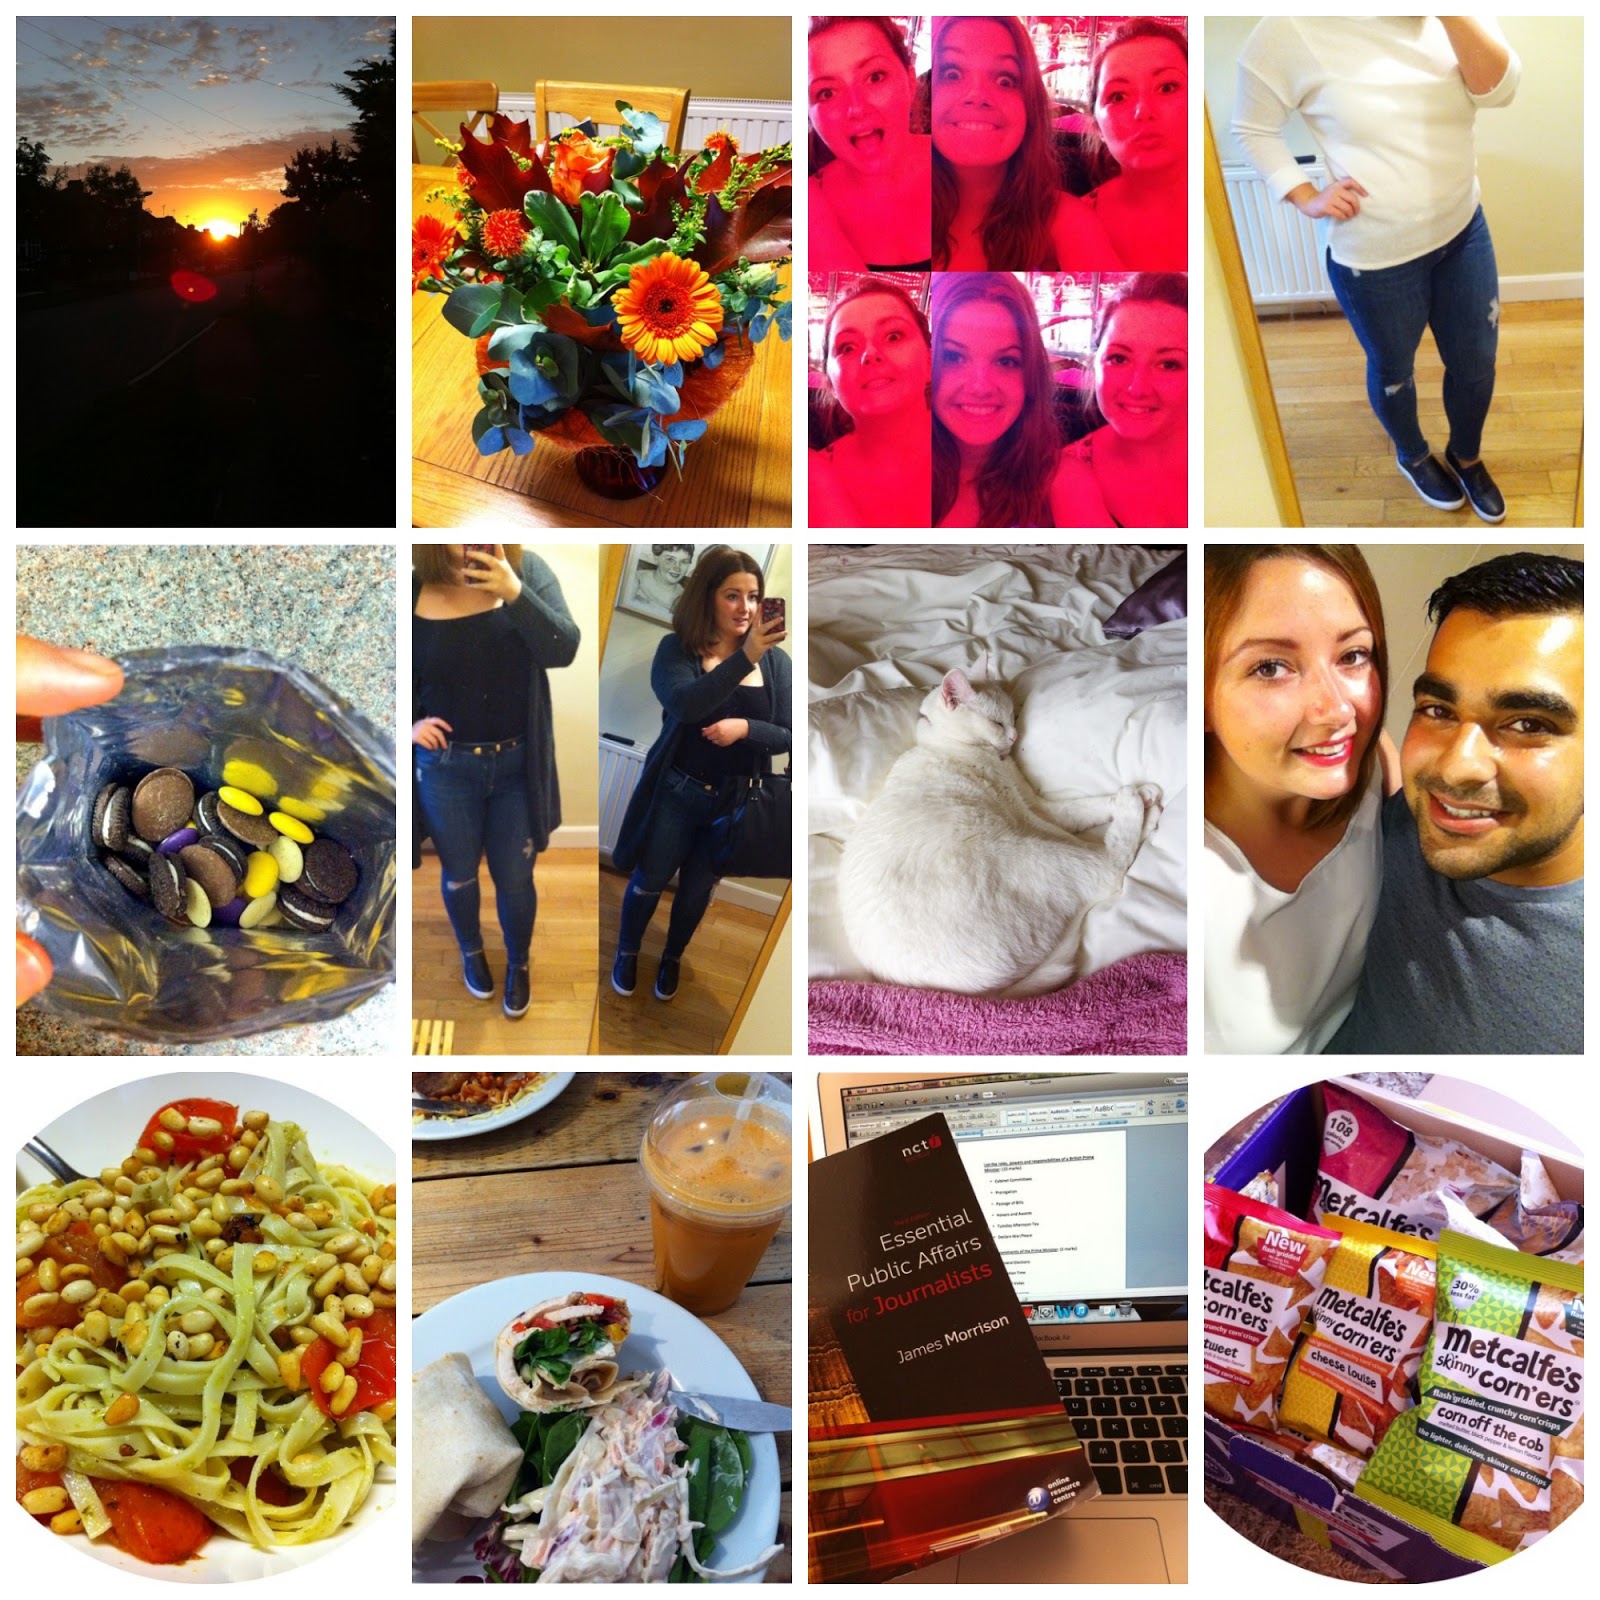 SEPTEMBER: My month in photos